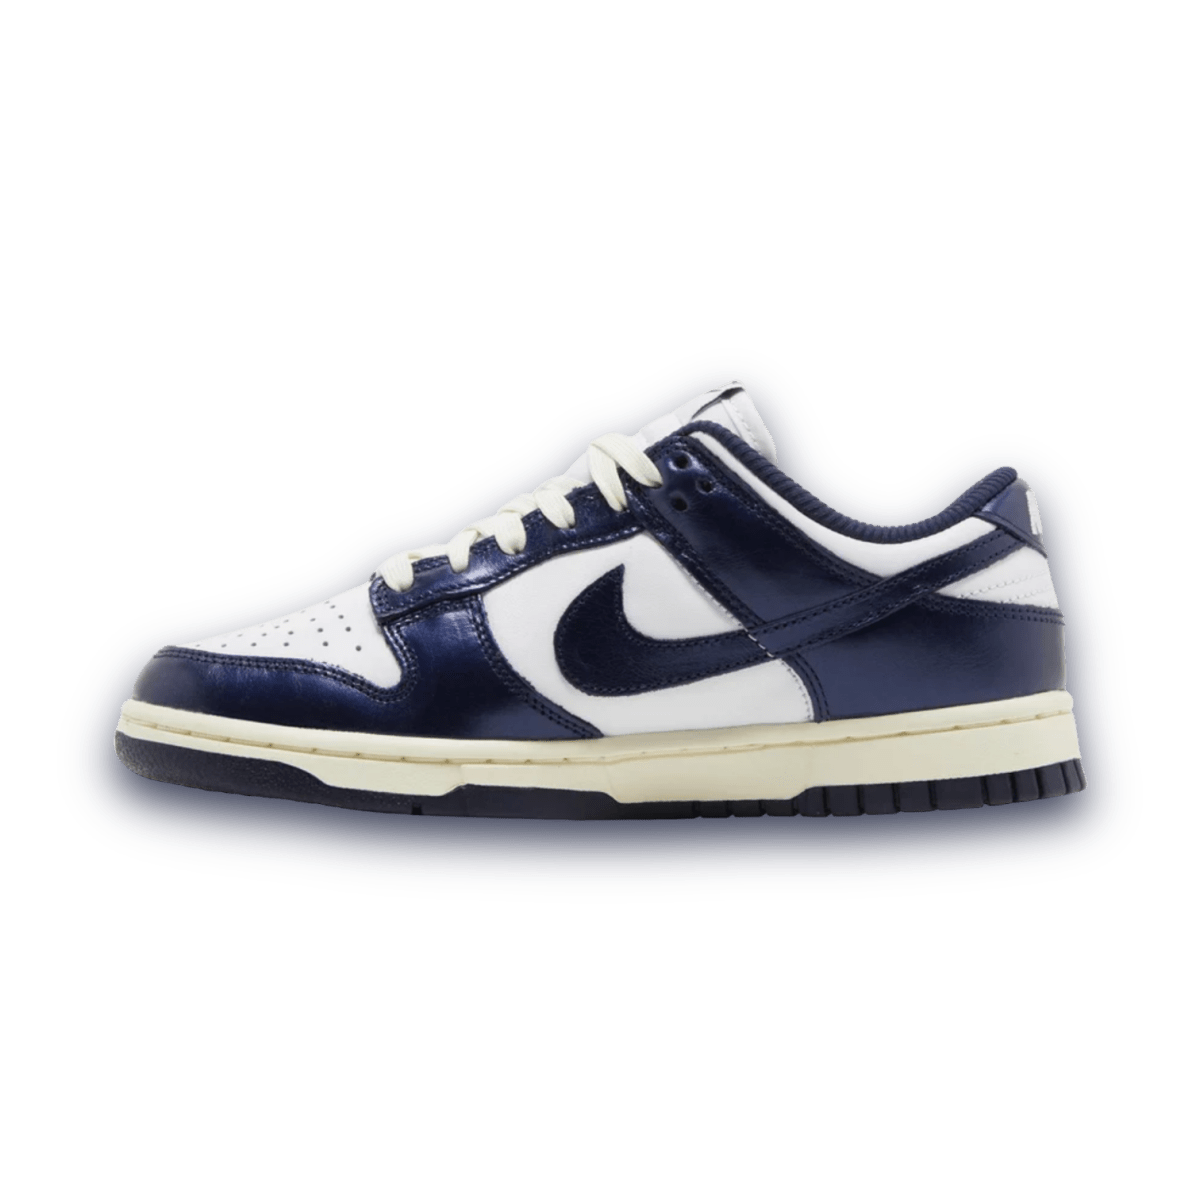 Laces for Lions Dunk Low 'Vintage Navy' - sneaker - Low Sneaker - Dunks - Jawns on Fire